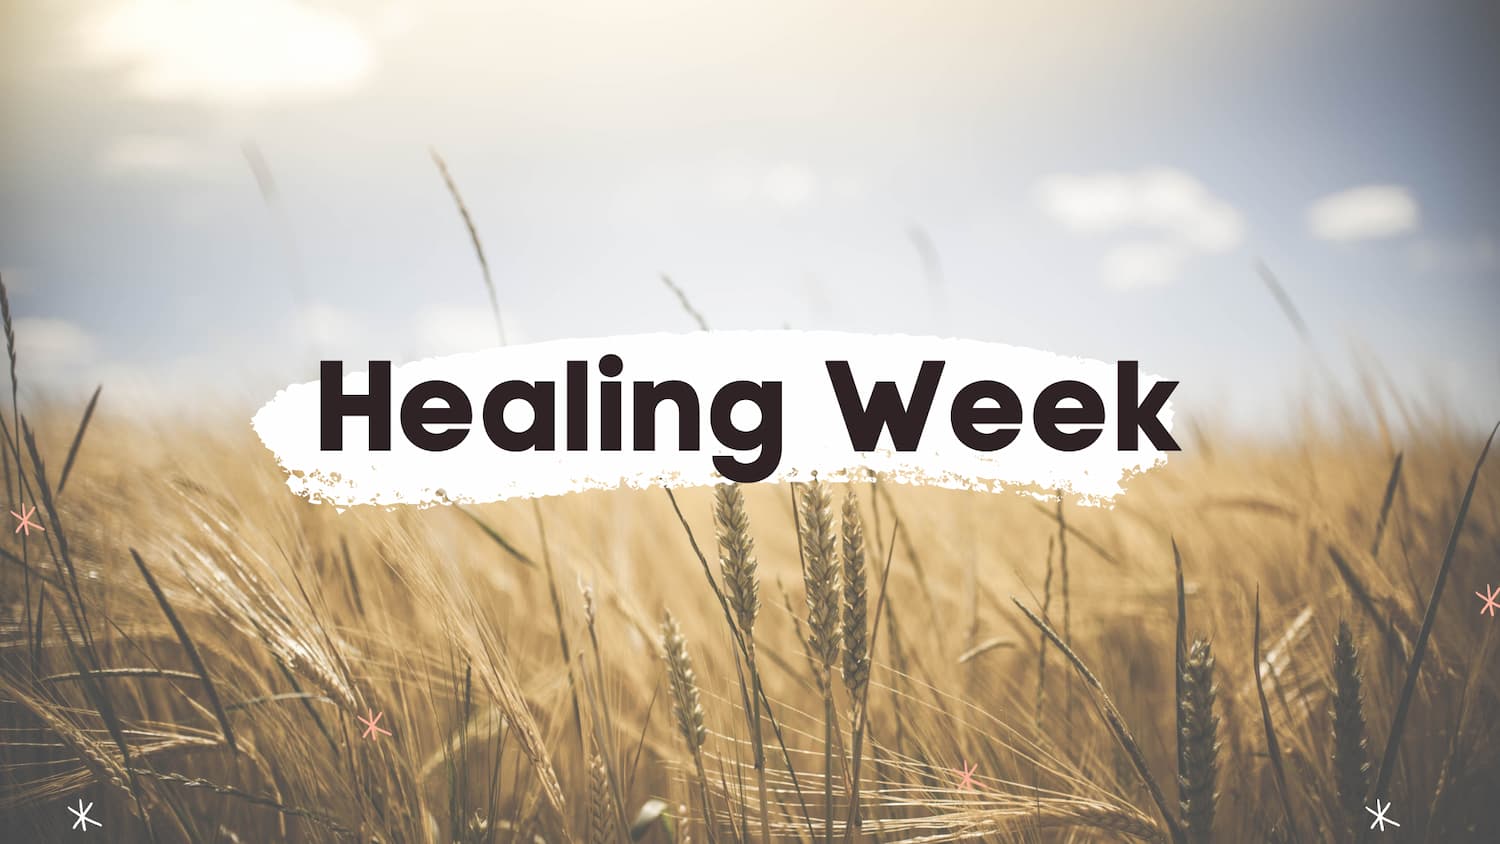 Featured image for “Healing Week”